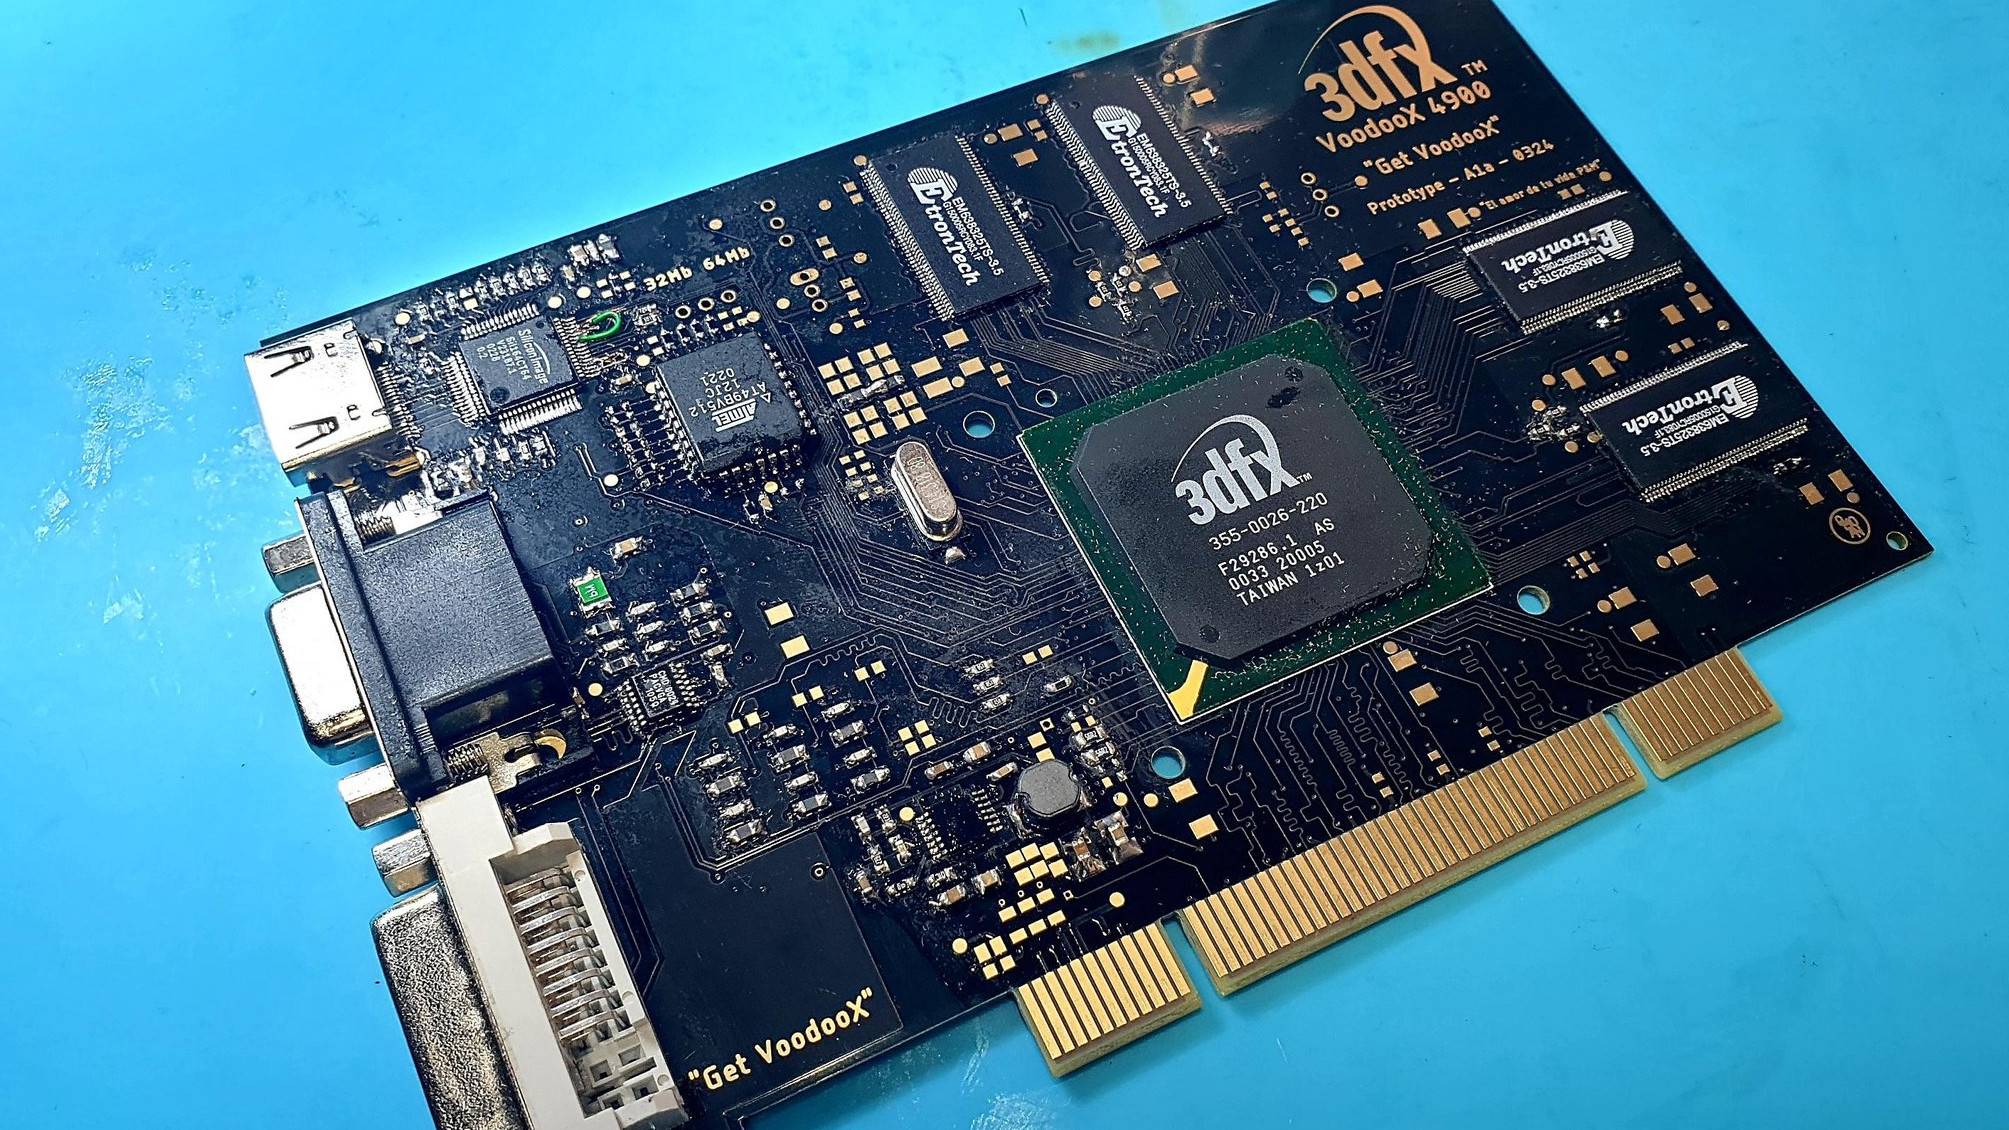 Determined enthusiasts are building a custom 3dfx graphics card — VoodooX has 32MB RAM and DVI output